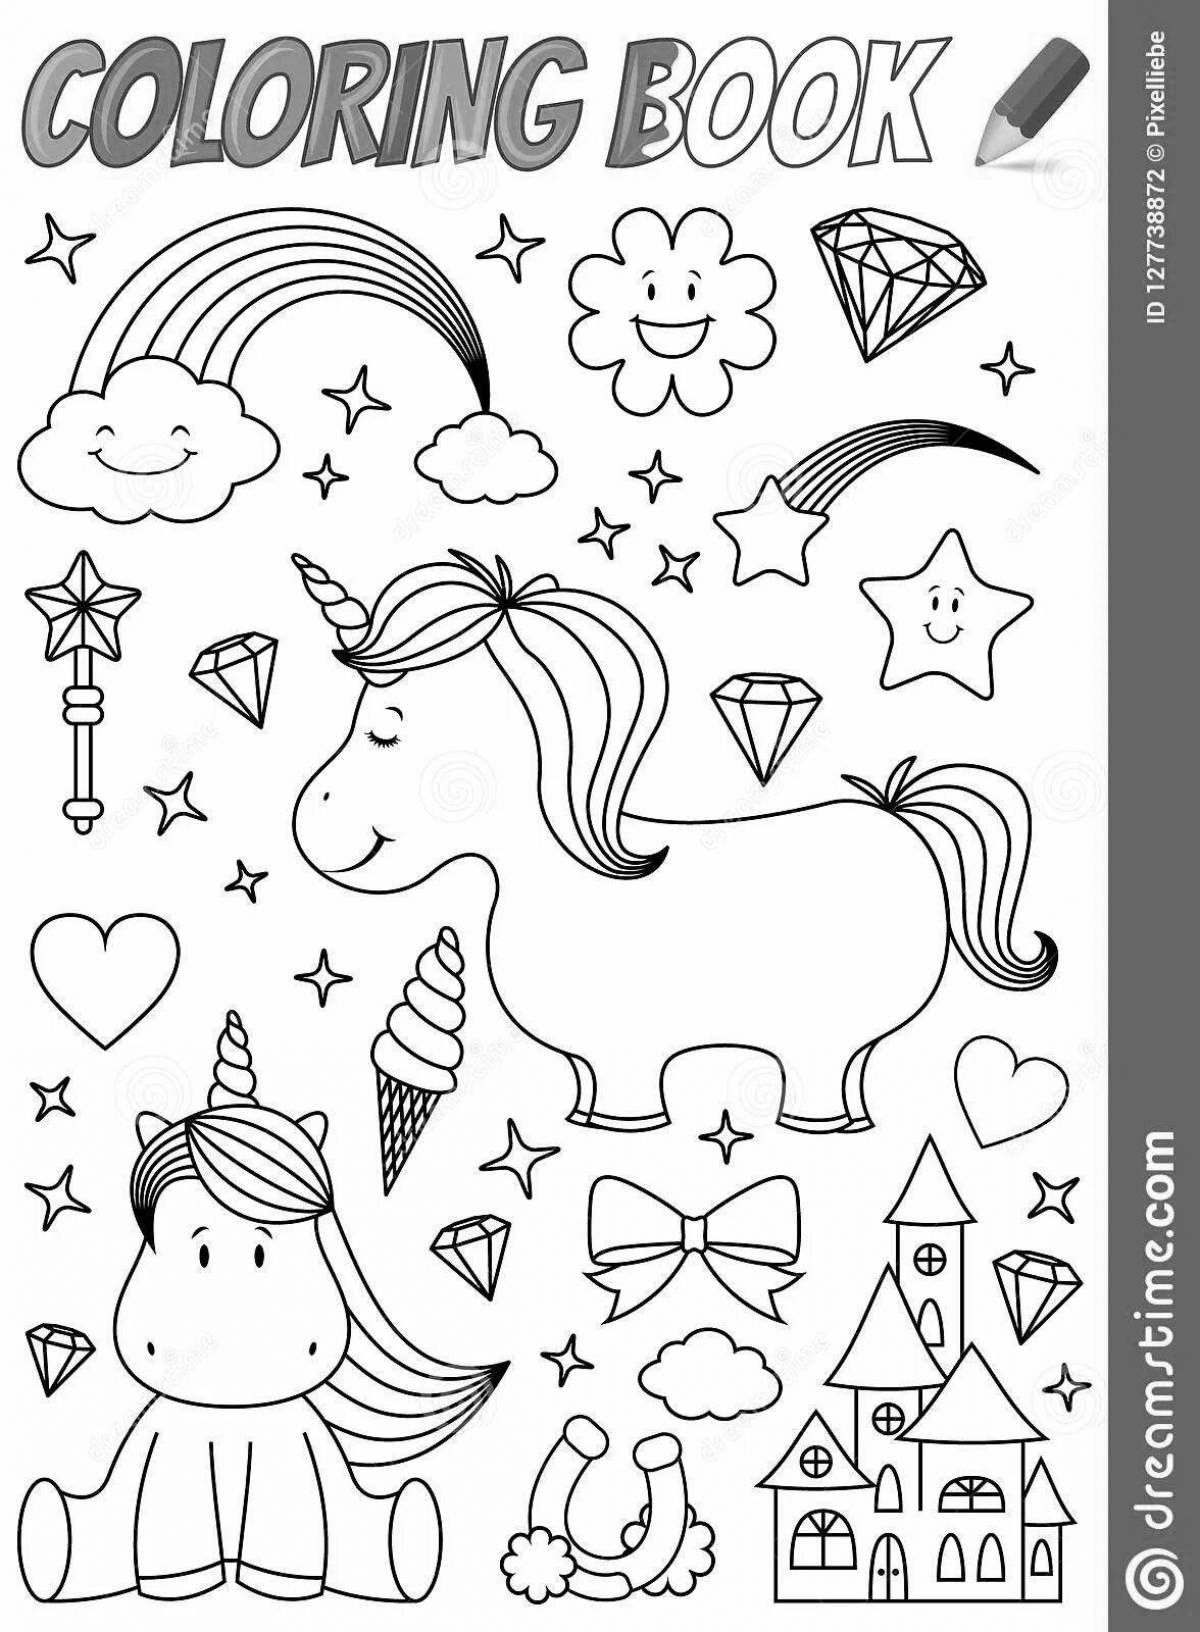 Glitter coloring book with lots of unicorns